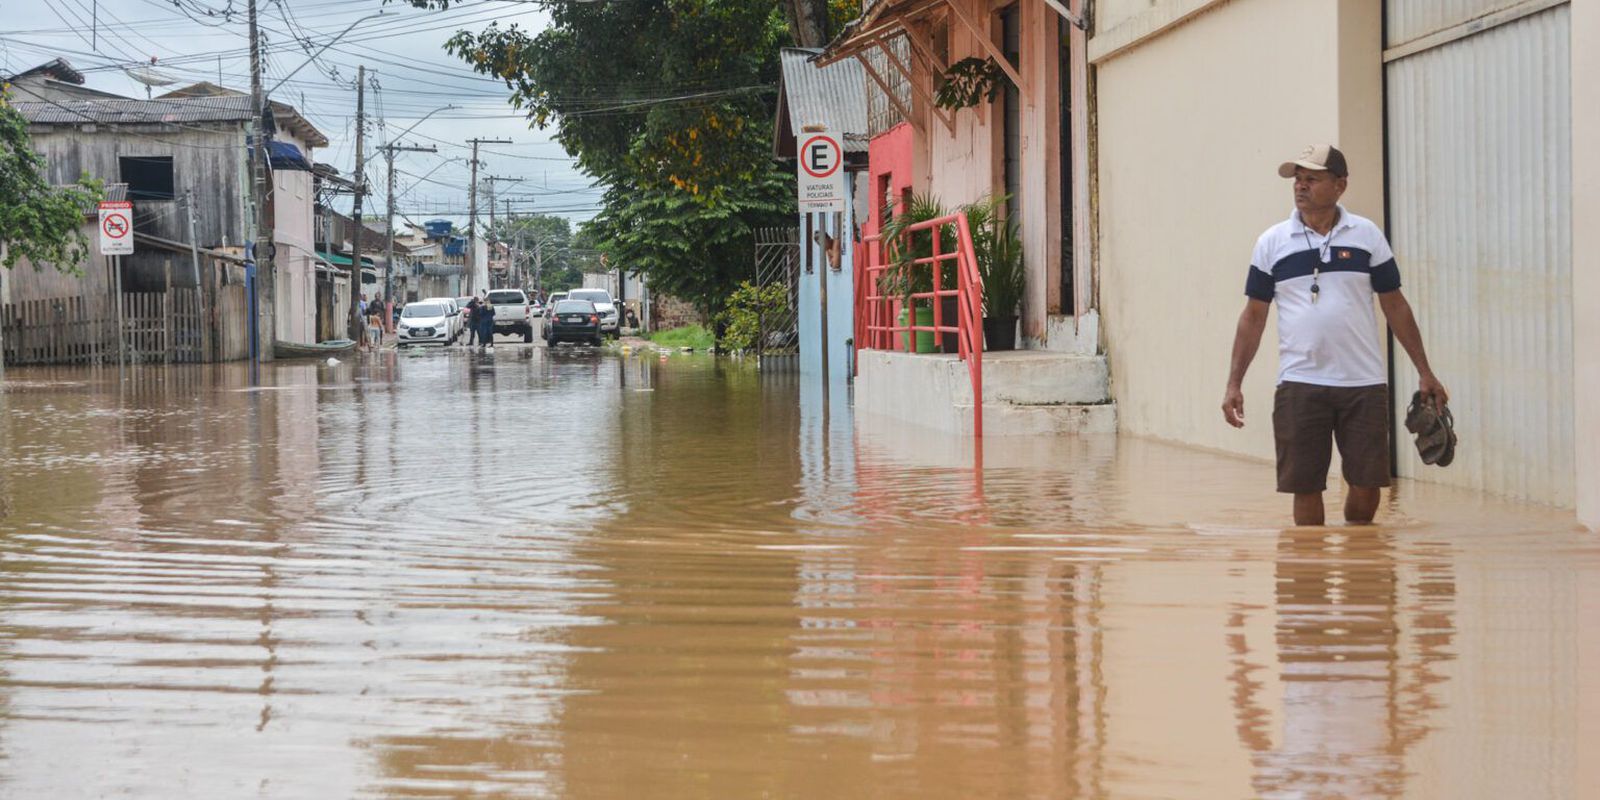 With thousands homeless, Rio Branco must suffer from more heavy rains